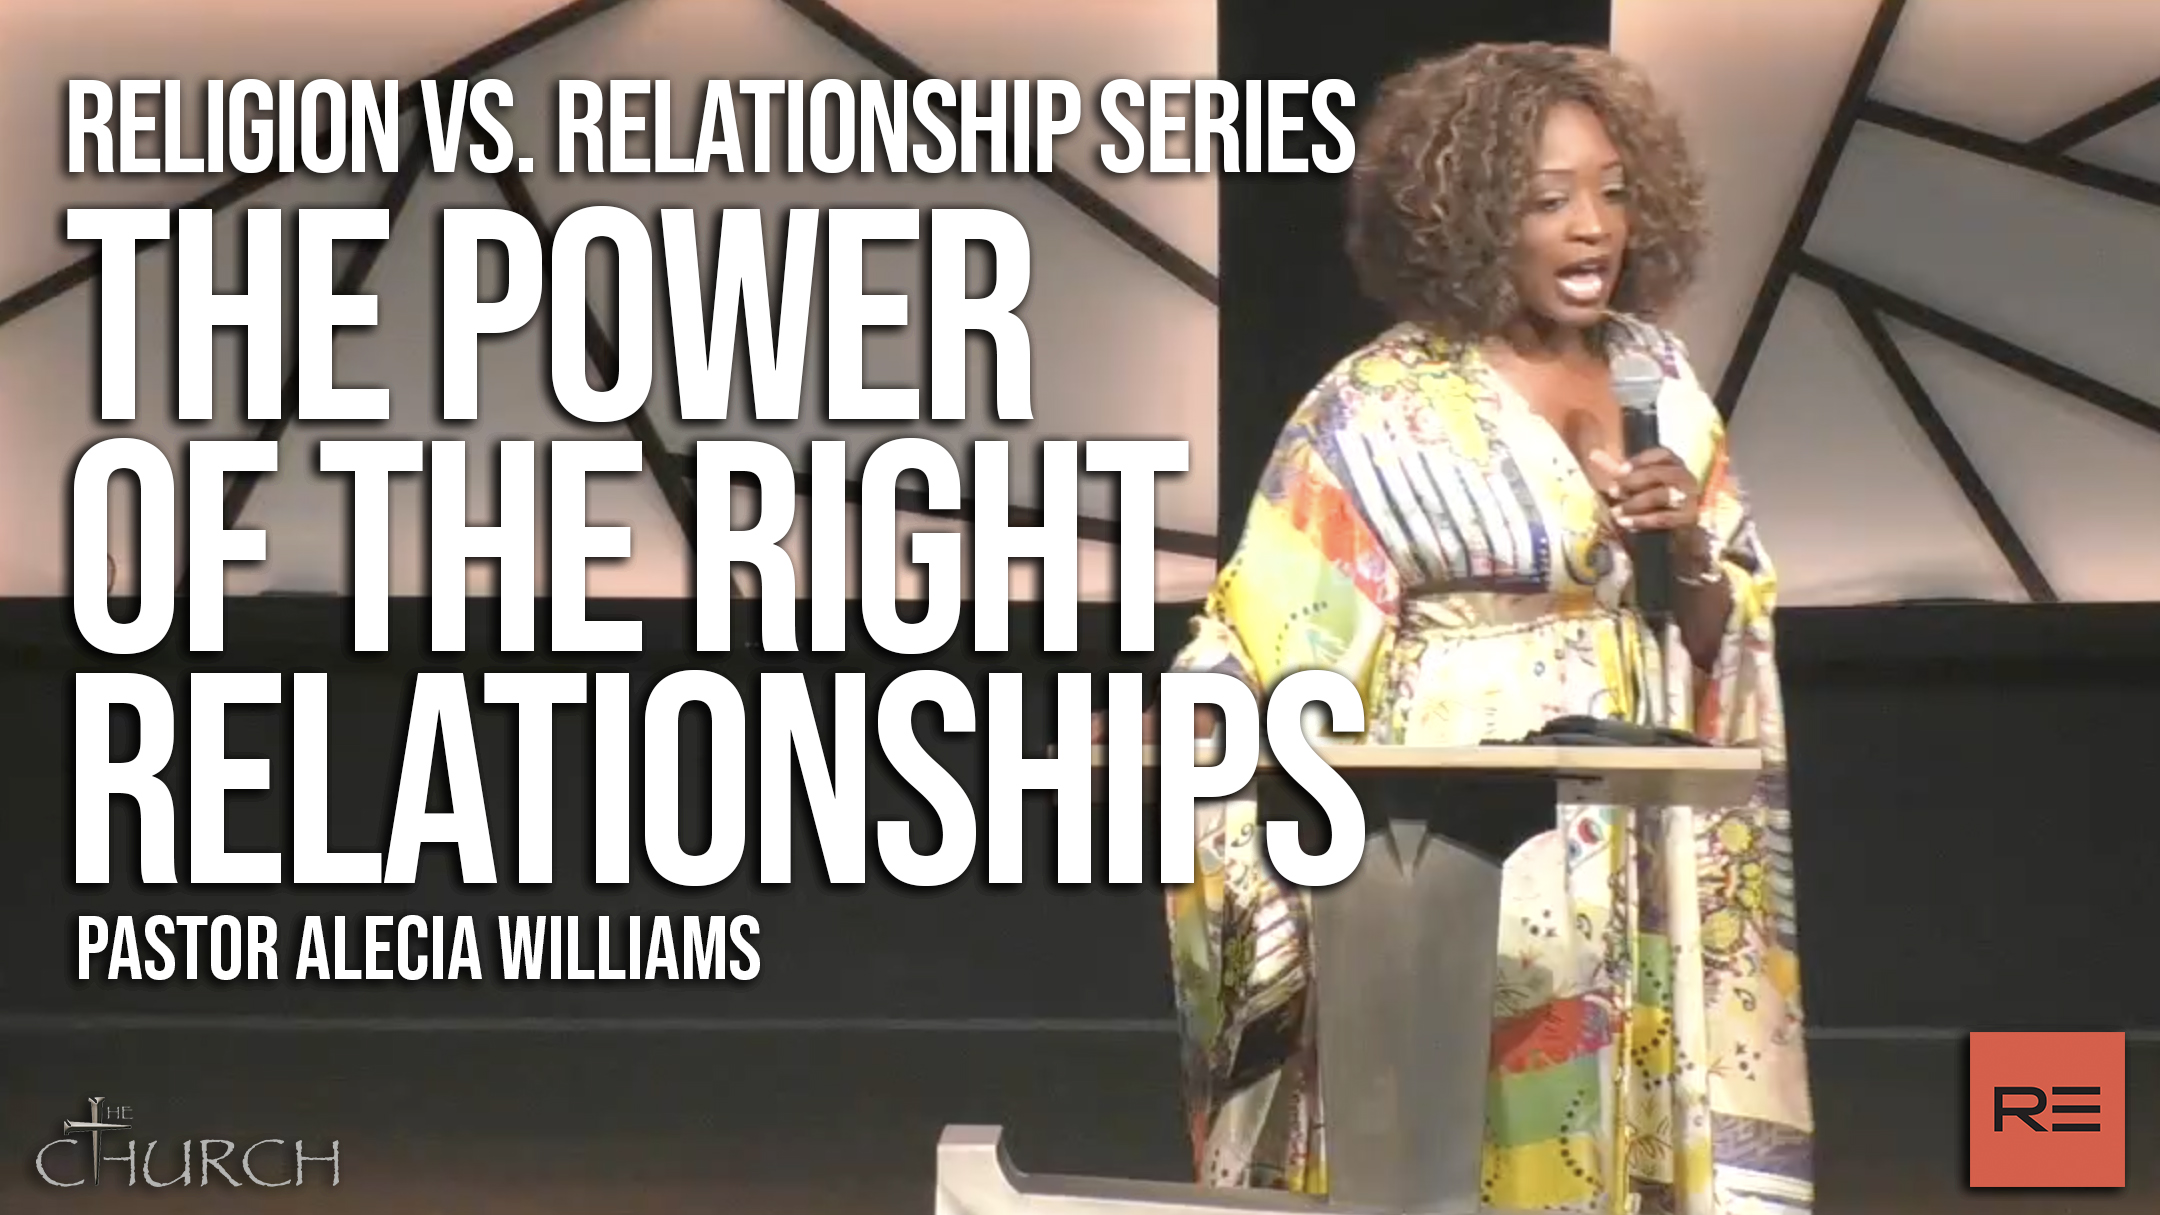 The Power of the Right Relationships | Pastor Alecia Williams